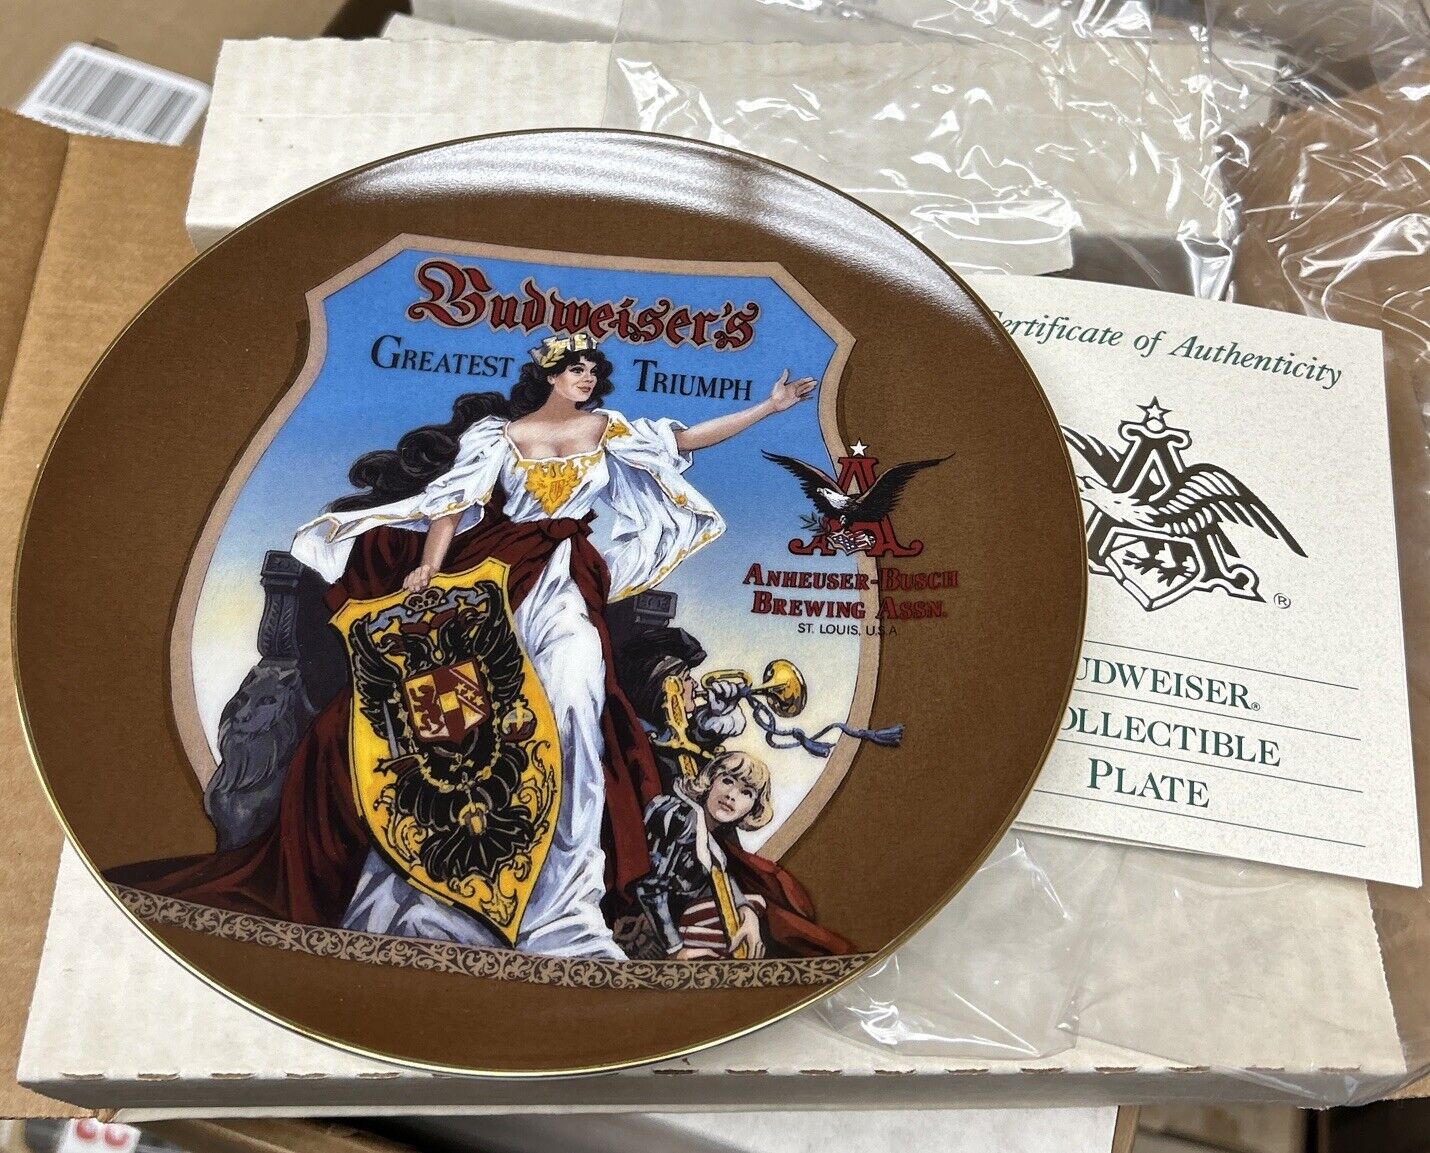 Budweiser Archives Series Collectable Plate “Budweiser’s Greatest Triumph”